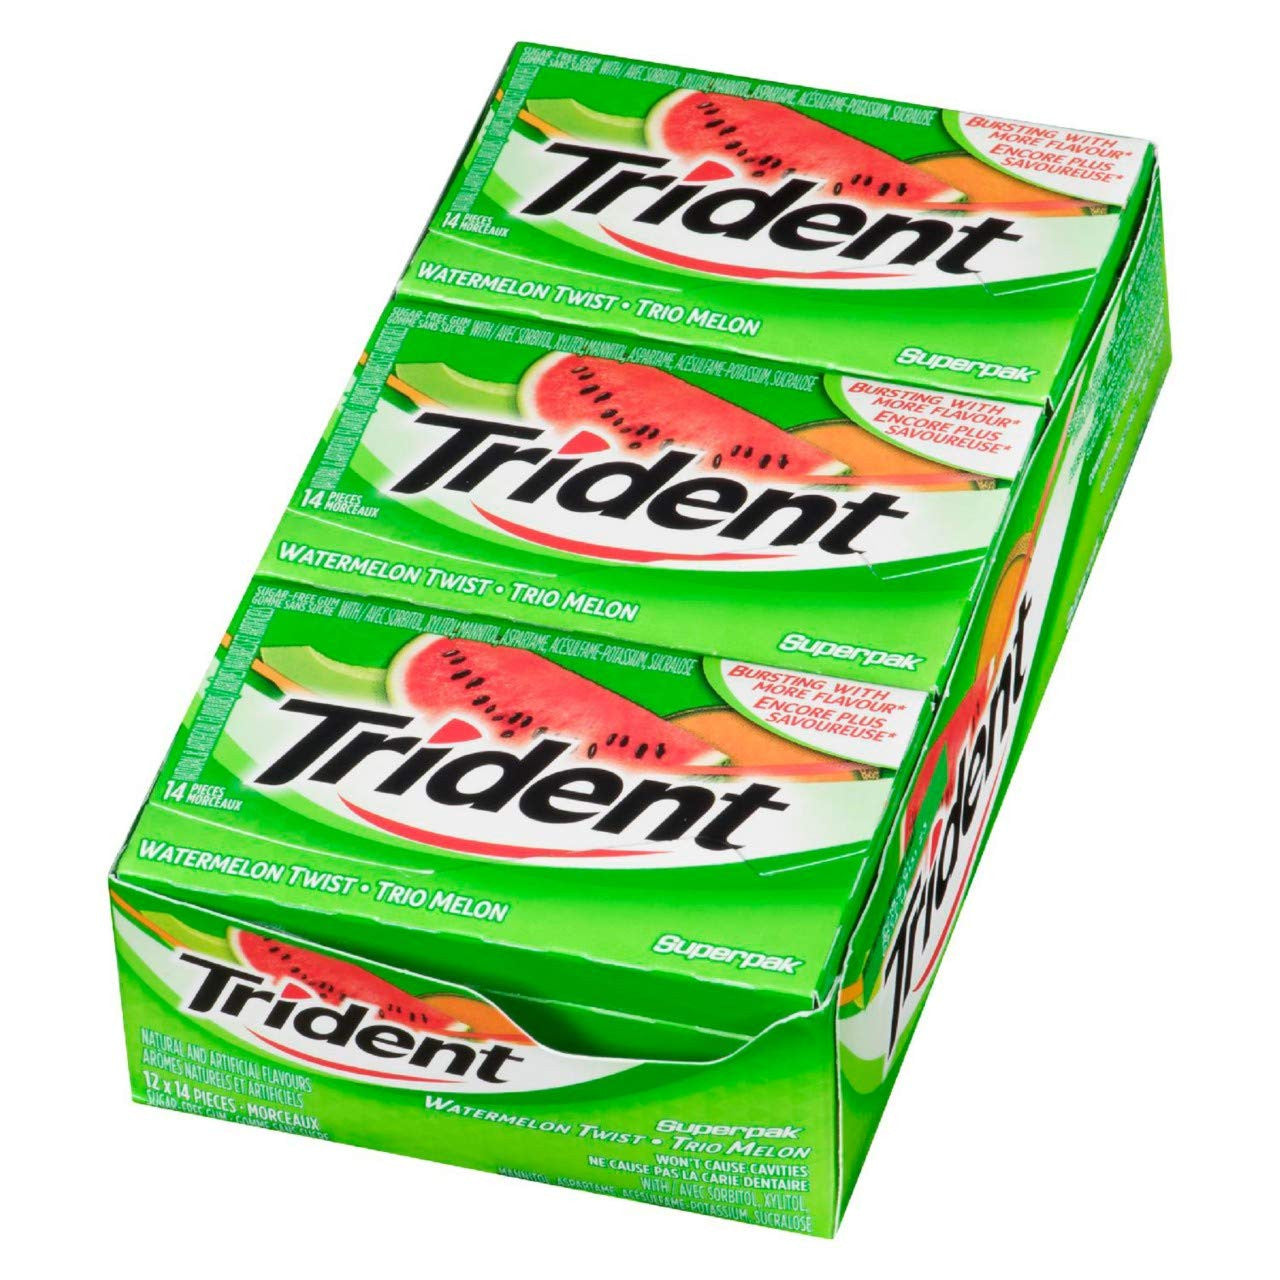 Trident Sugar Free Watermelon Twist Gum, 12 Pack (14 Pieces Each) {Imported from Canada}